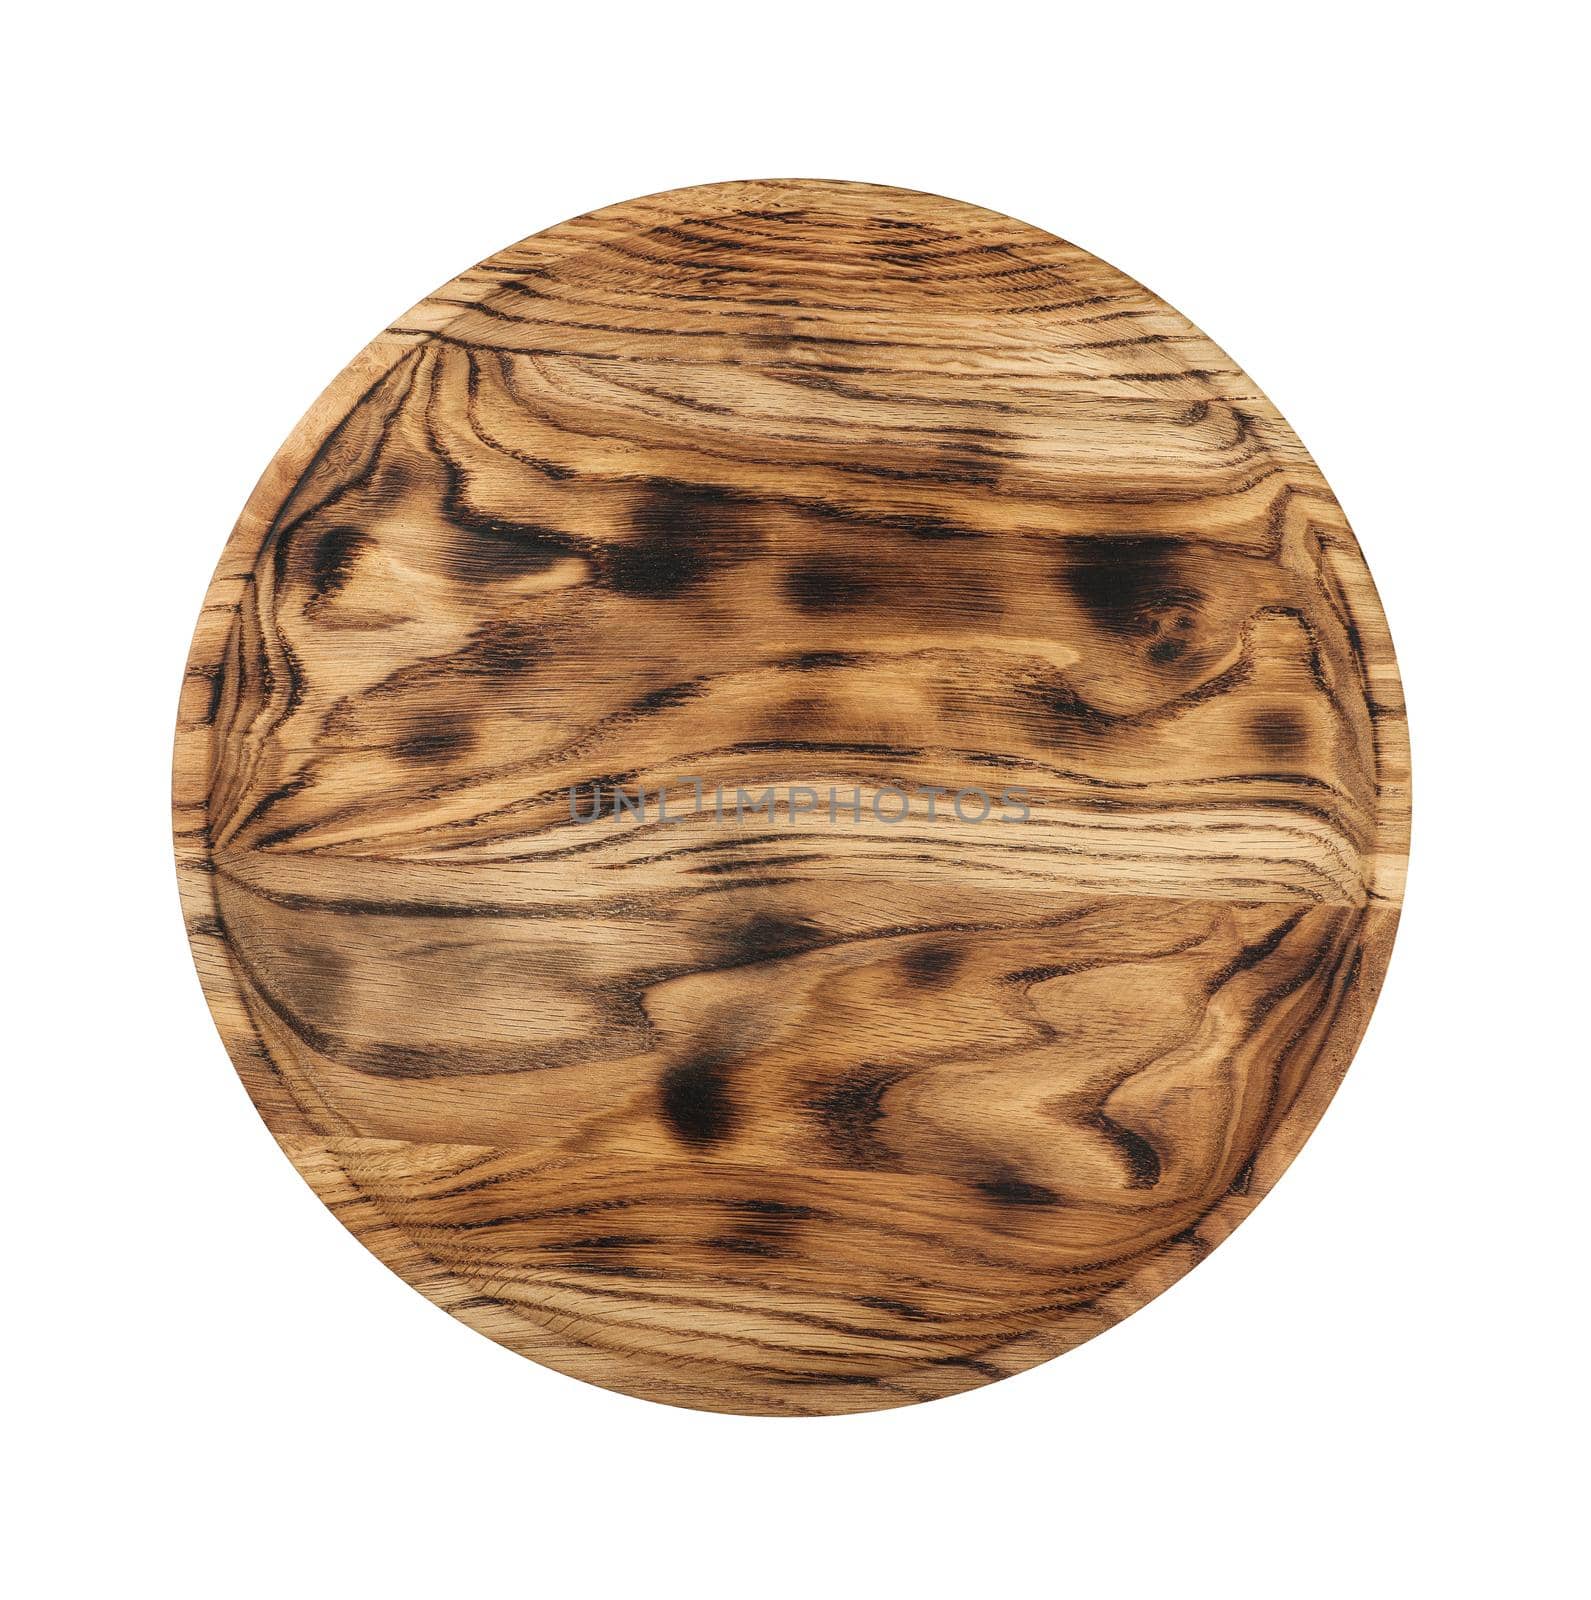 Round oak wood cutting board isolated on white by BreakingTheWalls